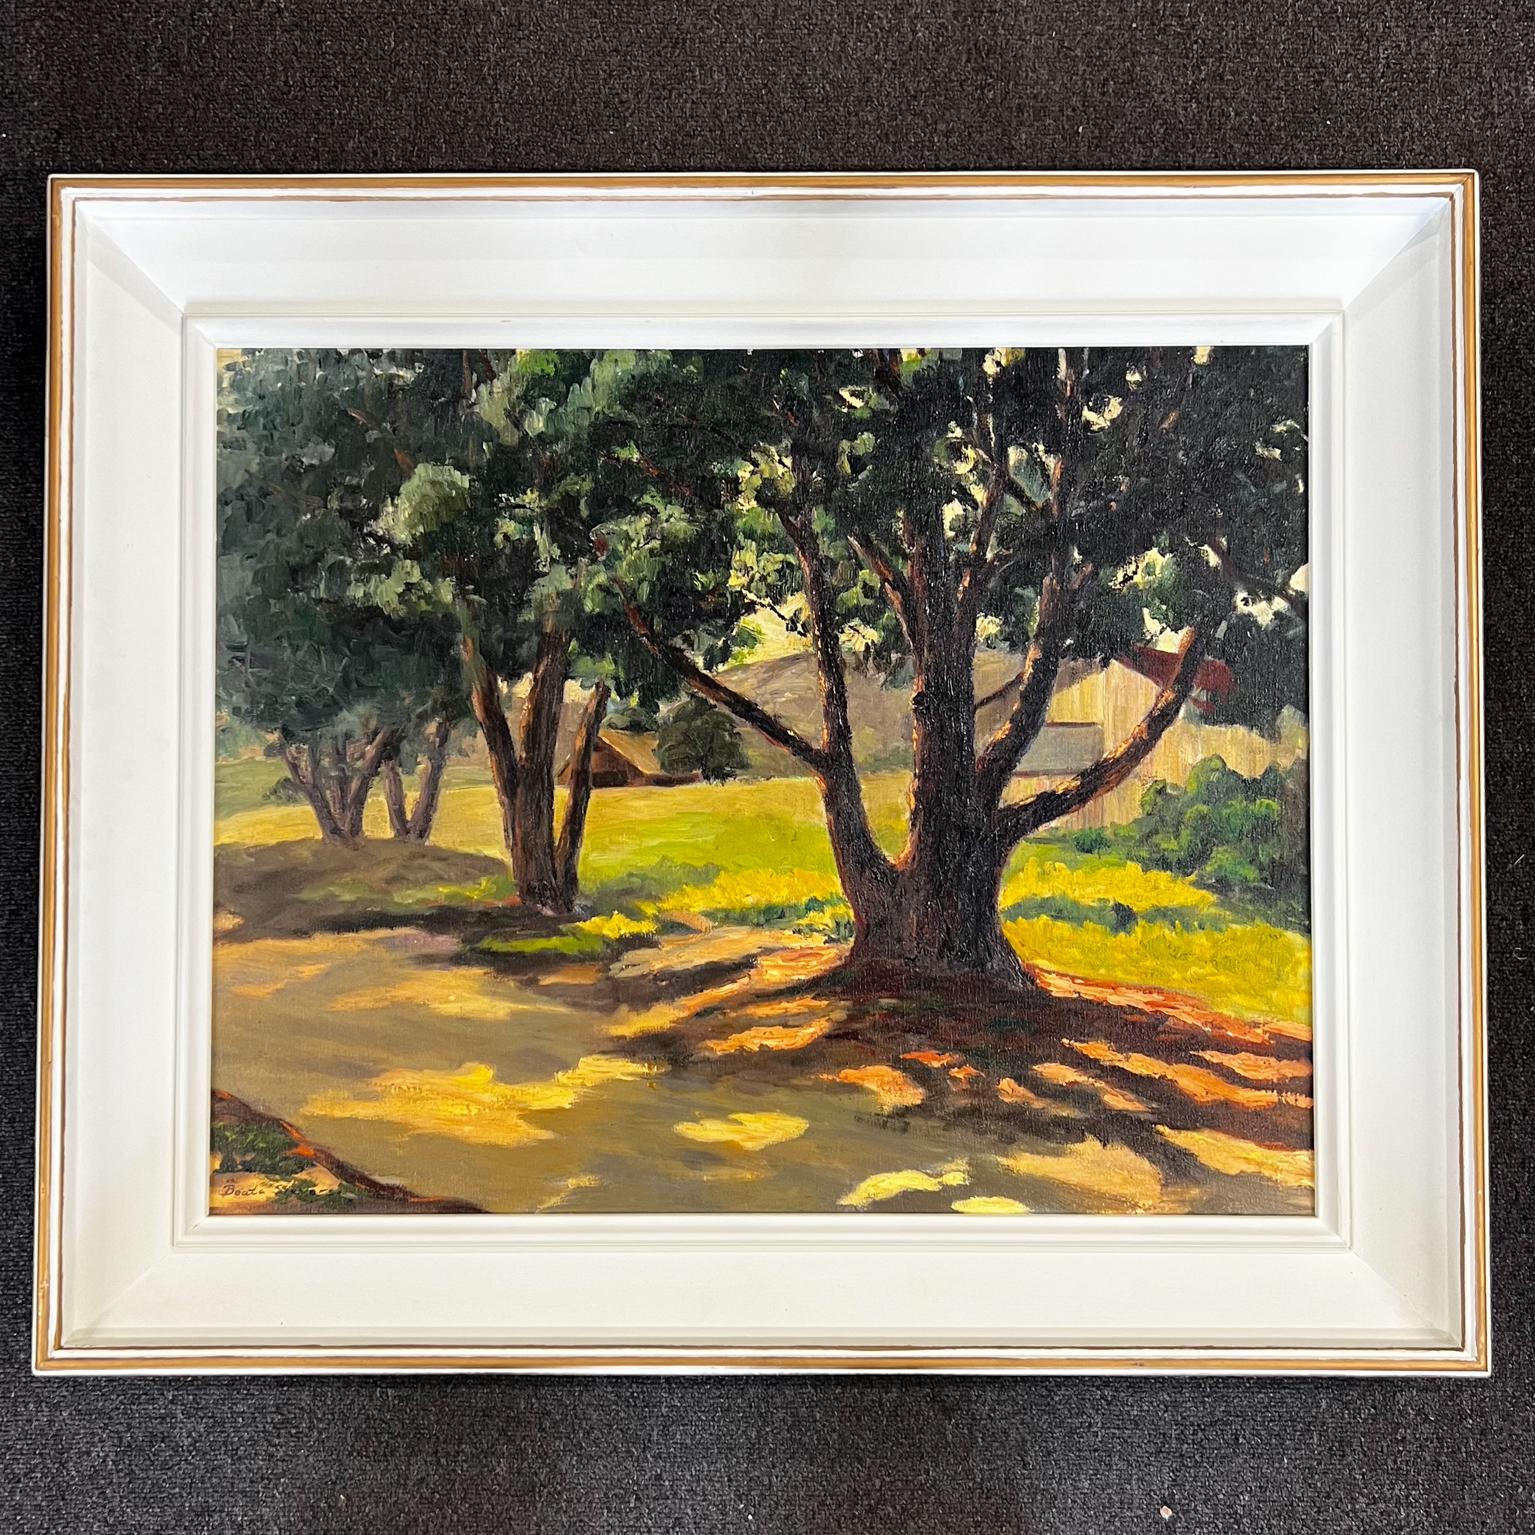 1970s Landscape Tree Art by Beata Stevens California Impressionism
Capturing unique light and atmosphere.
37 w x 30.75 tall x 3 d Art 29.5 x 23.5
Preowned Original vintage condition
Refer to all images provided.